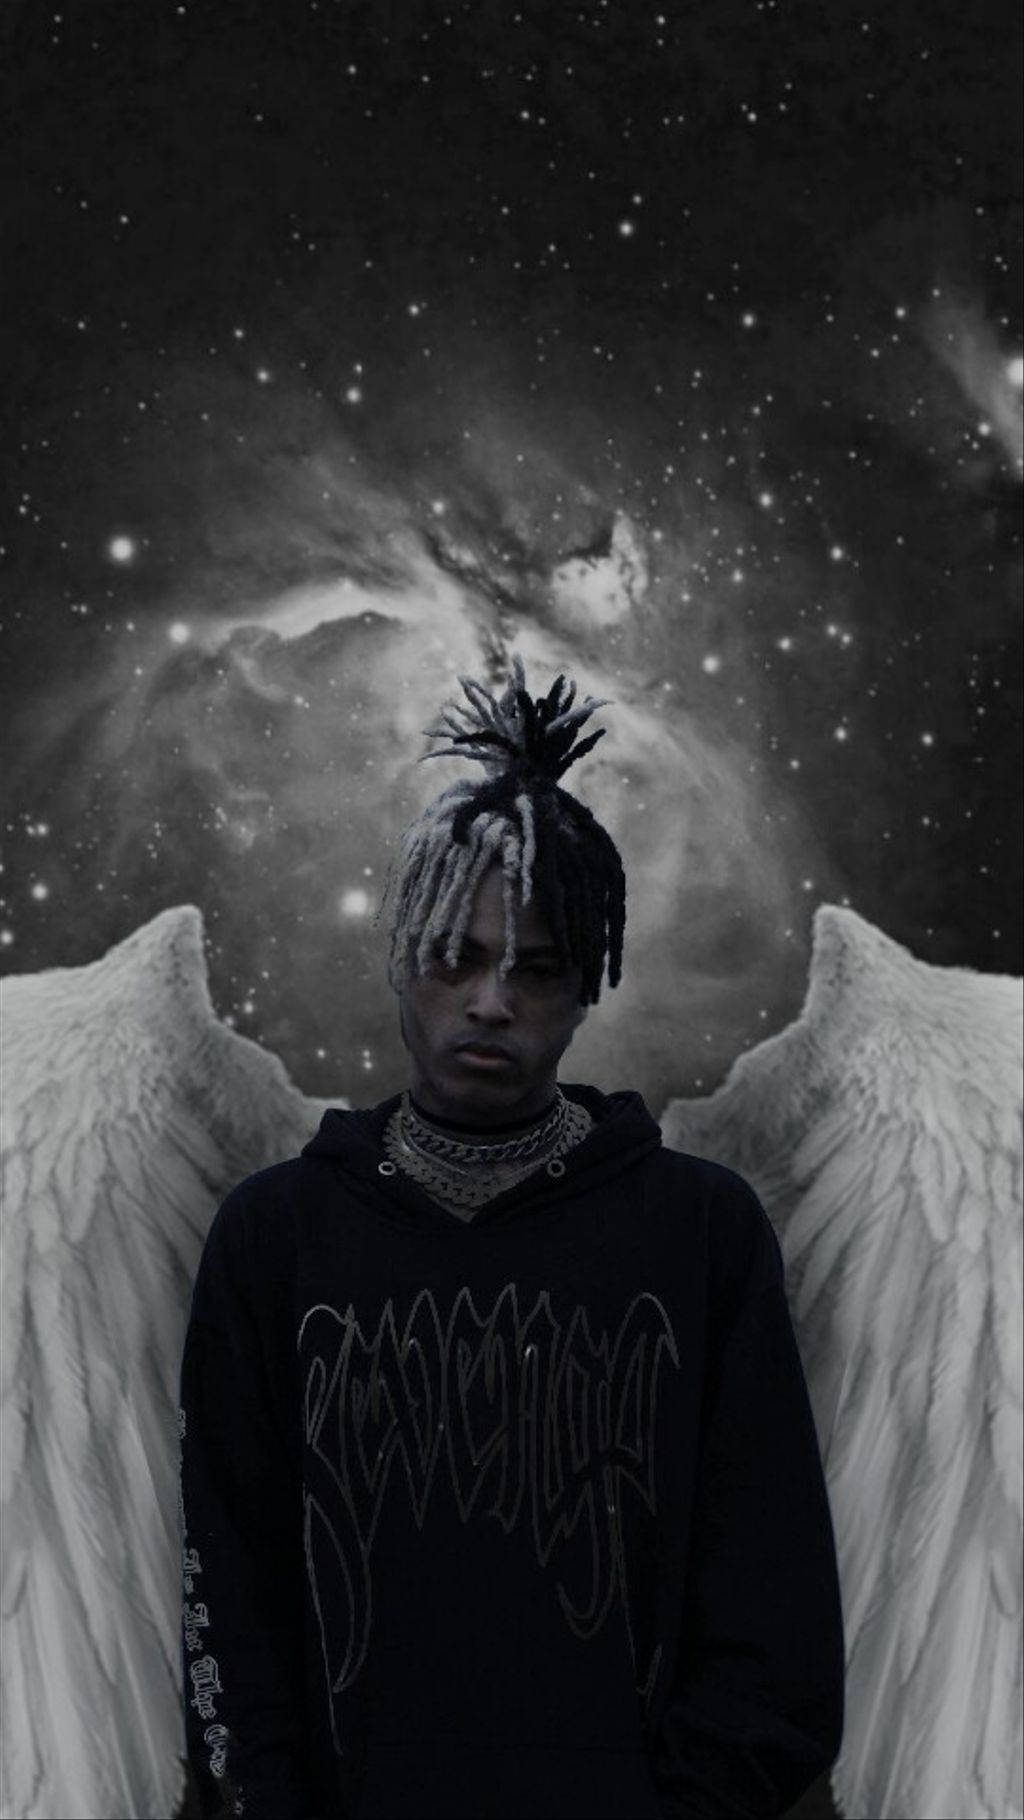 A man with wings and an angelic look - XXXTentacion